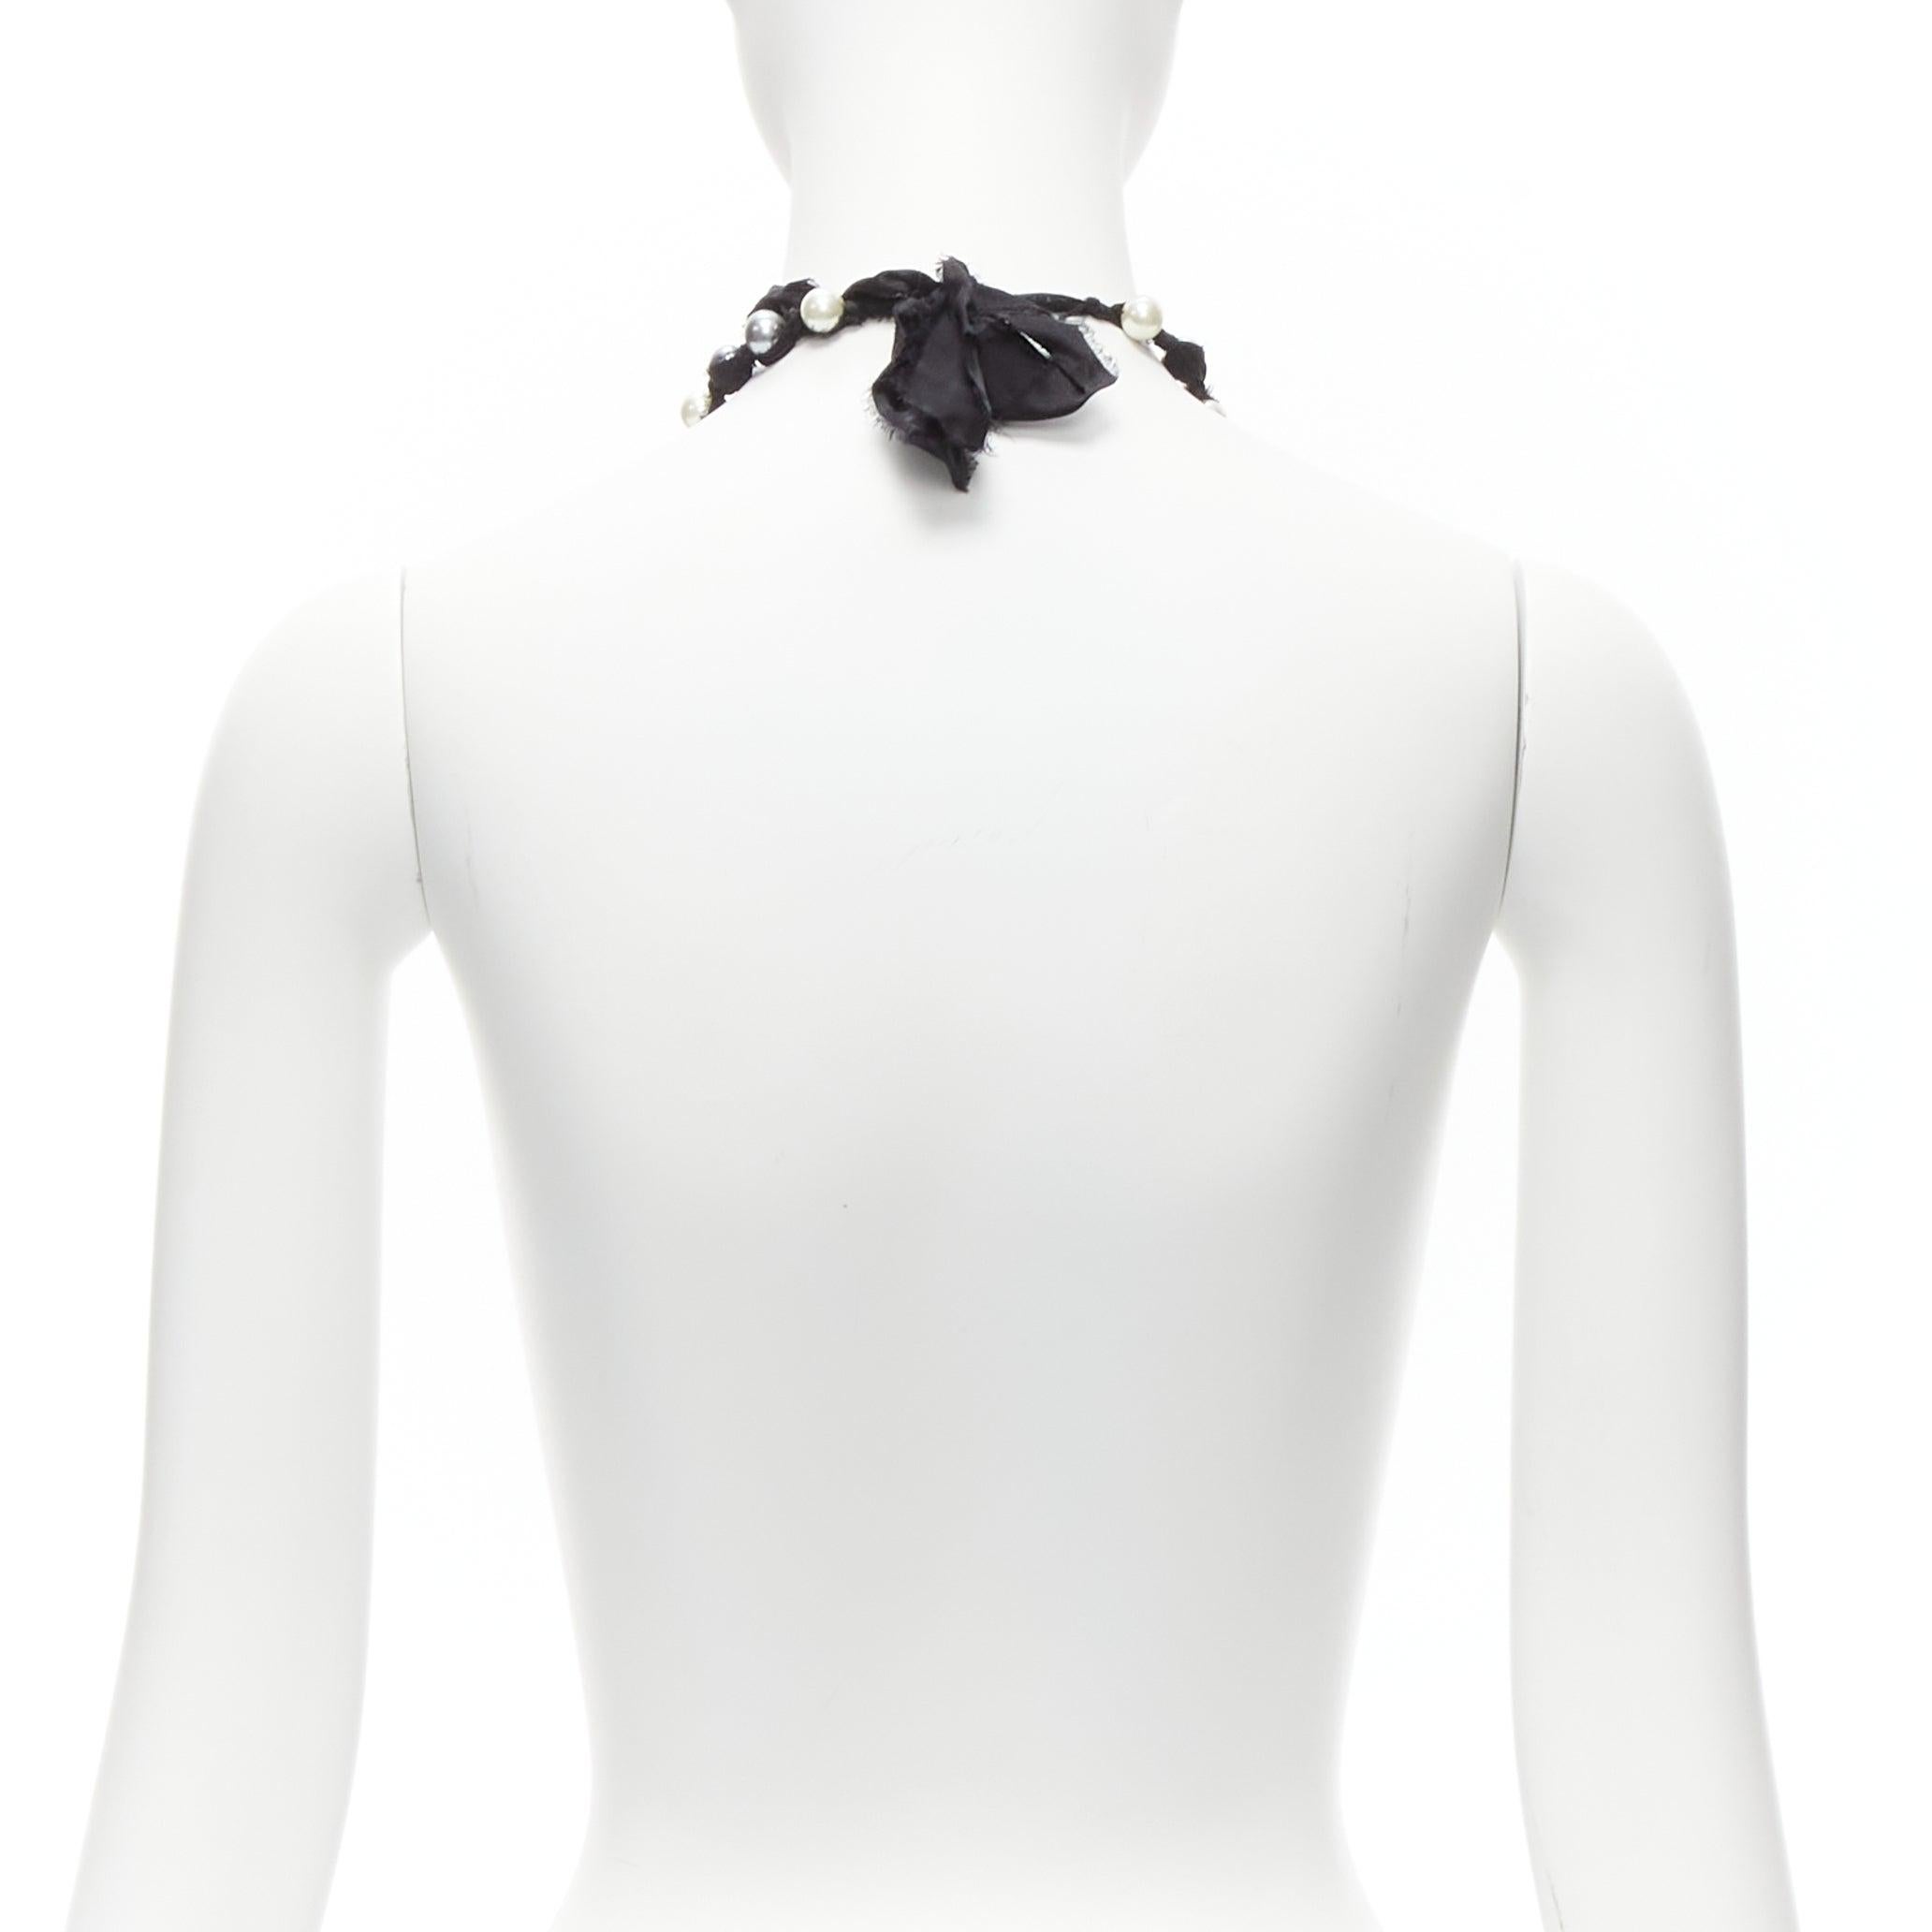 LANVIN ALBER ELBAZ cream charcoal black pearl silk ribbon wrapped long necklace For Sale 1